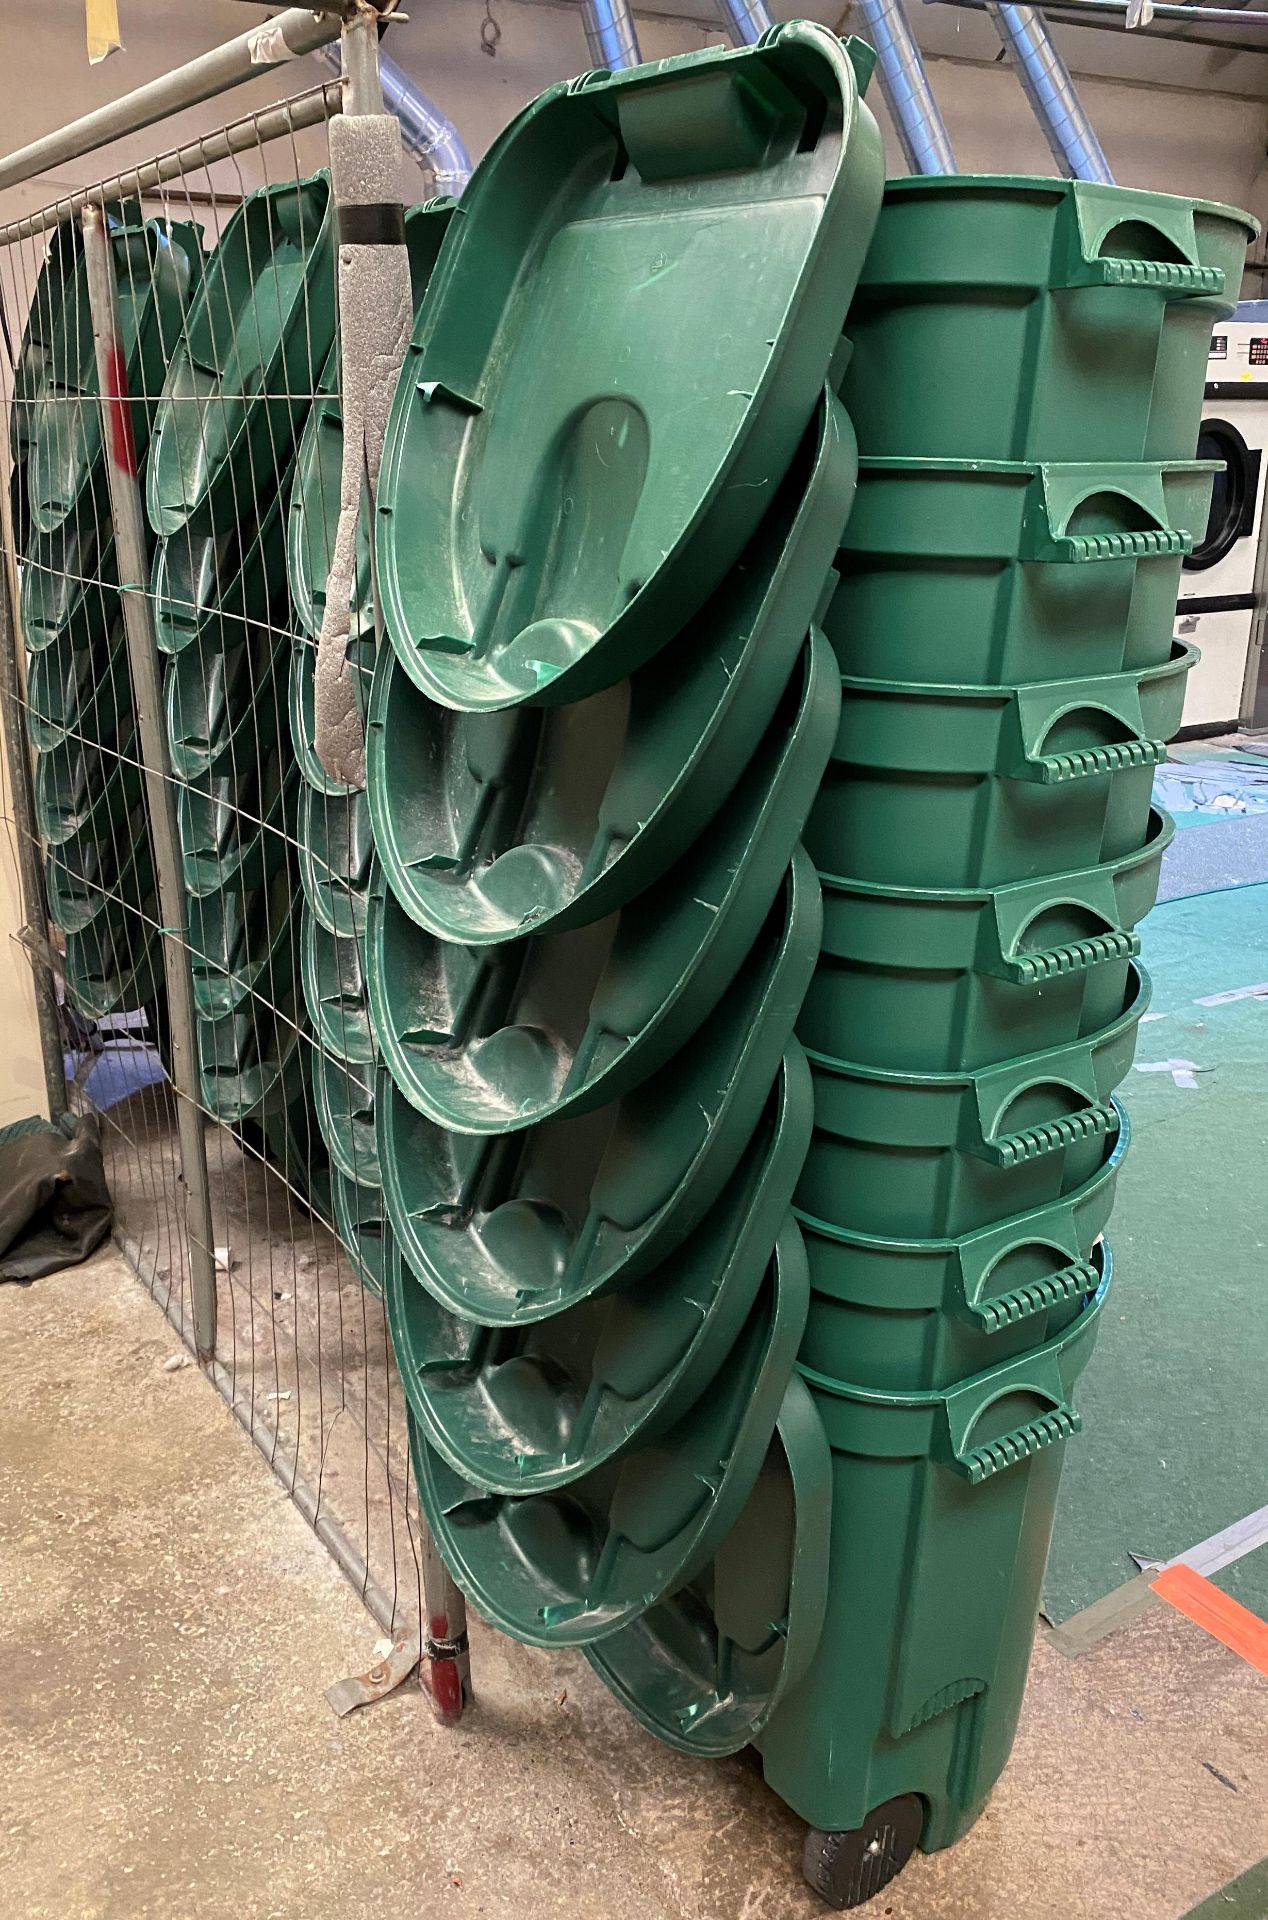 36 x EDA 110L Green Wheelie Bins - used for laundry - Image 2 of 5